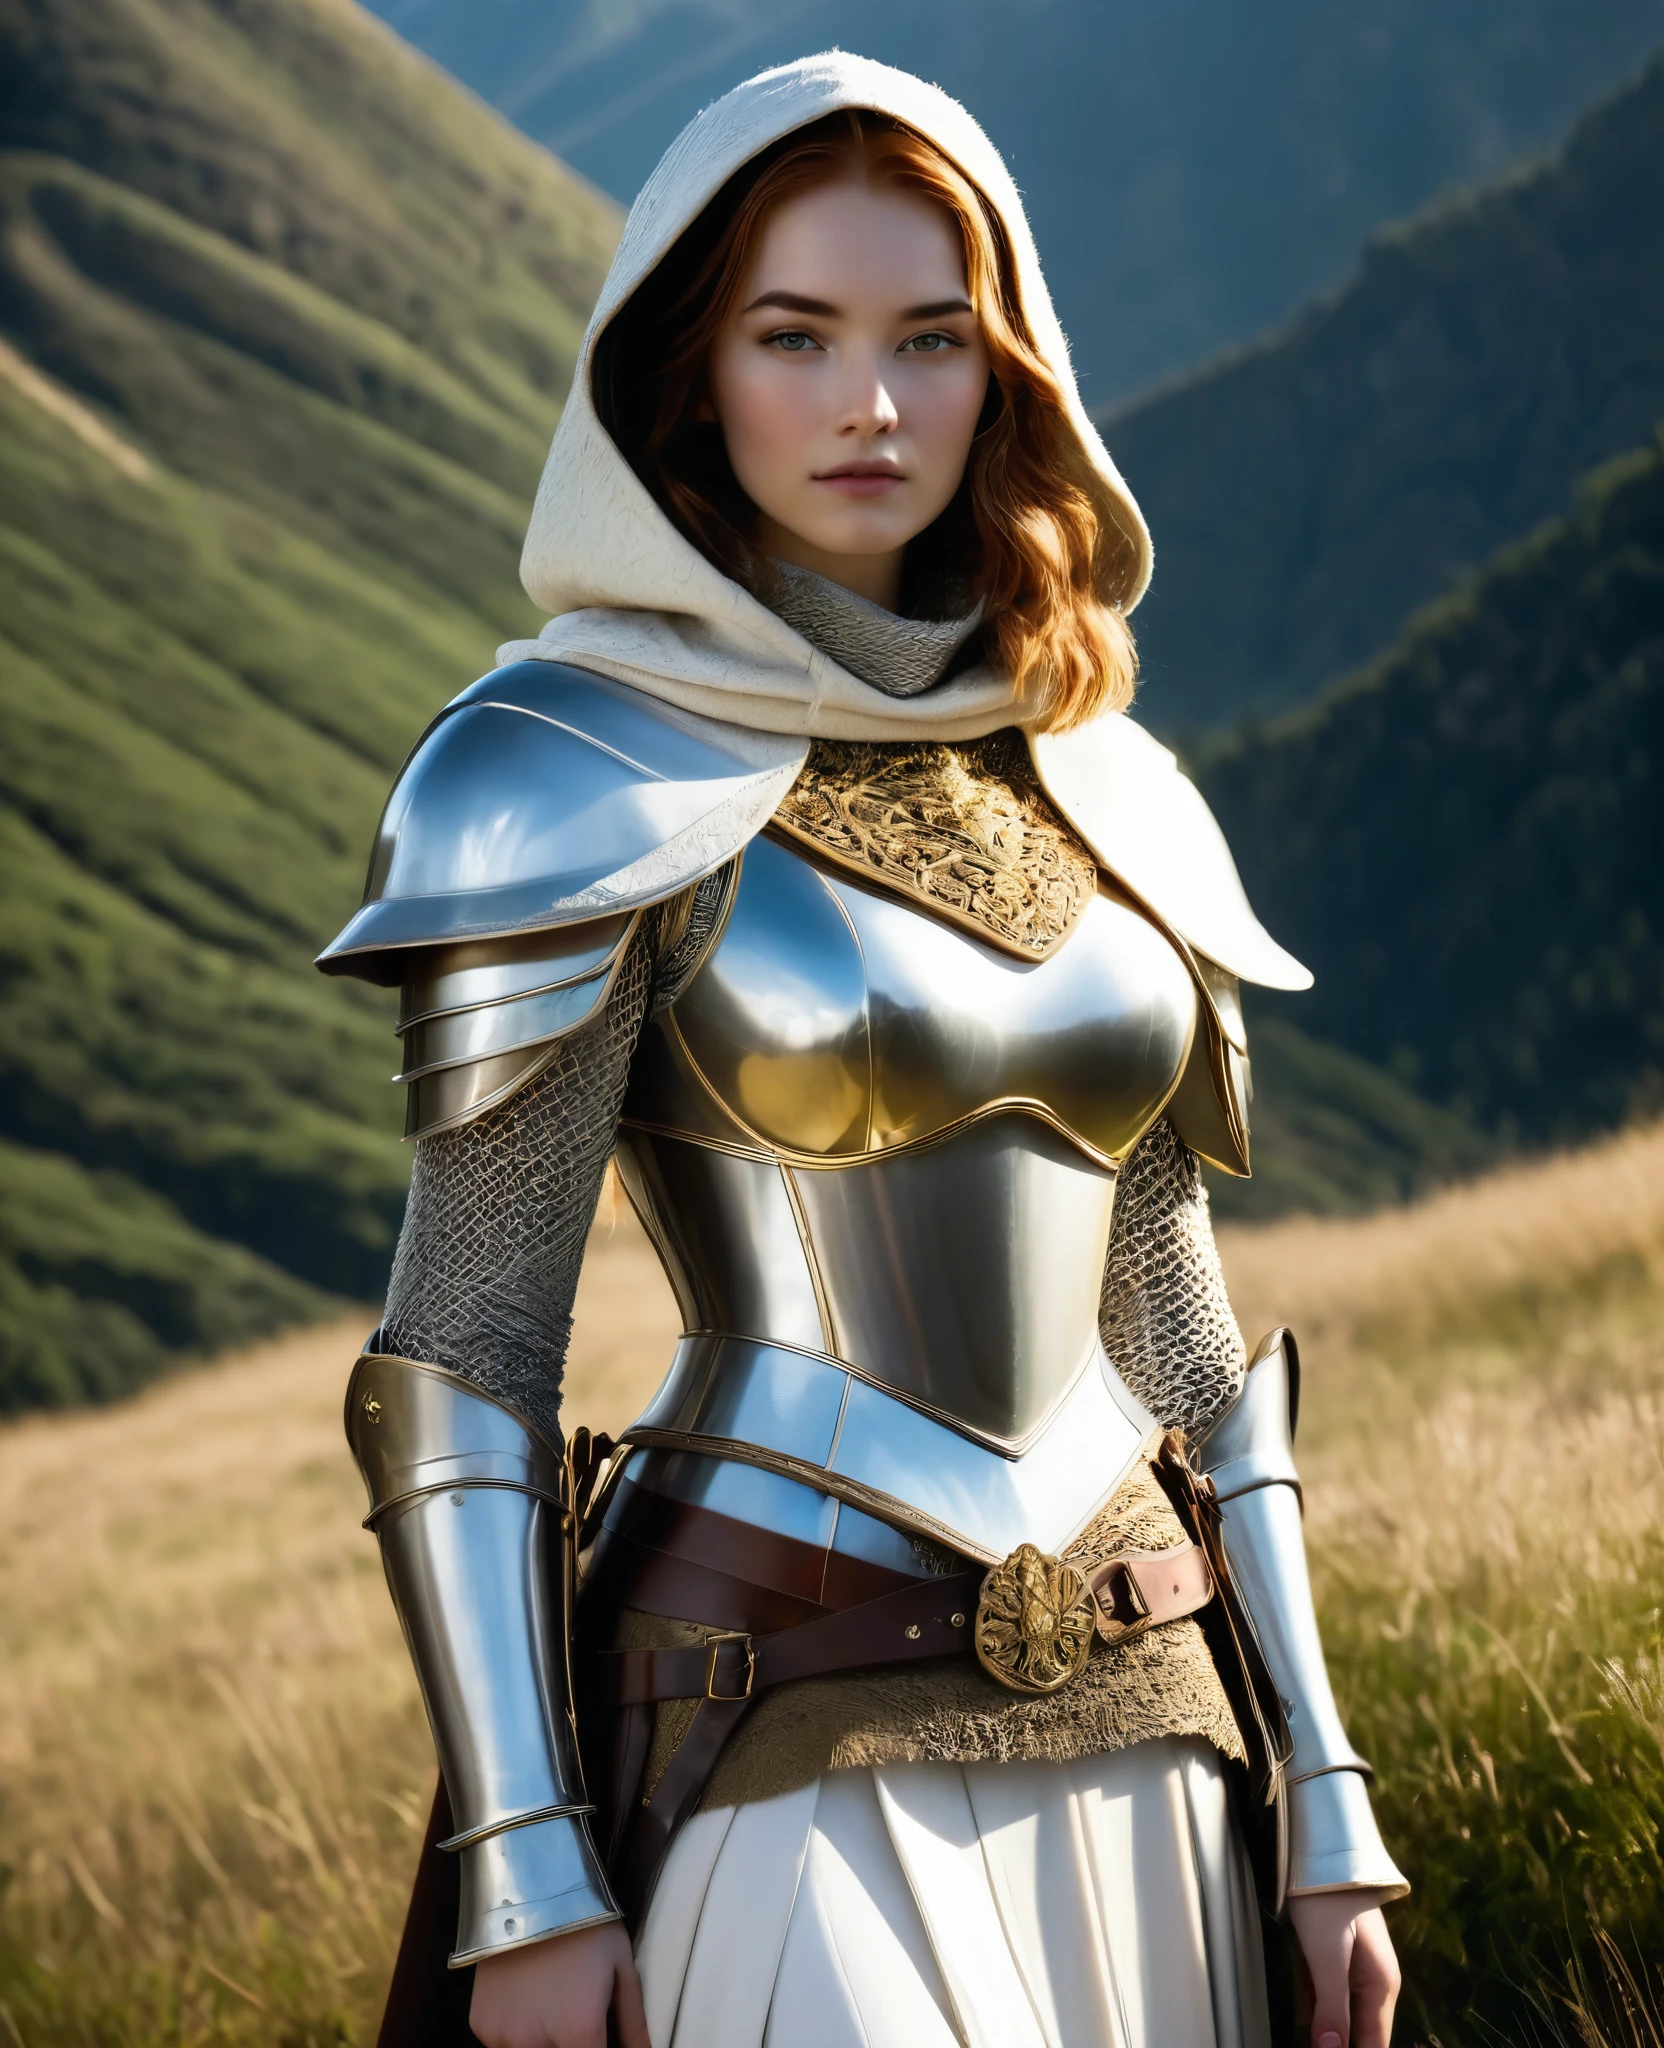 (masterpiece, top quality, best quality, beautiful and aesthetic:1.2), (1girl:1.3), light freckles, fair skin, extremely detailed, portrait, looking at viewer, solo, (full body:0.6), detailed background, close up, (warm grasslands theme:1.1), holy paladin knight, charlatan, smirk, mysterious, swaying in mountains, sensual attire, ((((ornate white and gold metal plate armor)))), wimple, boob armor, cowl, robe, chain mail, chainmail, leggings, chainmail leggings, chain mail leggings, breastplate, tabard, gorget, hood, pauldrons, greaves, armored, long boots, longsword, shield, cape, cloak, pearlescent metal, white fabric, pale leather, ((((gigantic breasts)))), slim waist, slim hips, long legs, medieval (mountain exterior:1.1) background, dark mysterious lighting, shadows, magical atmosphere, dutch angle,